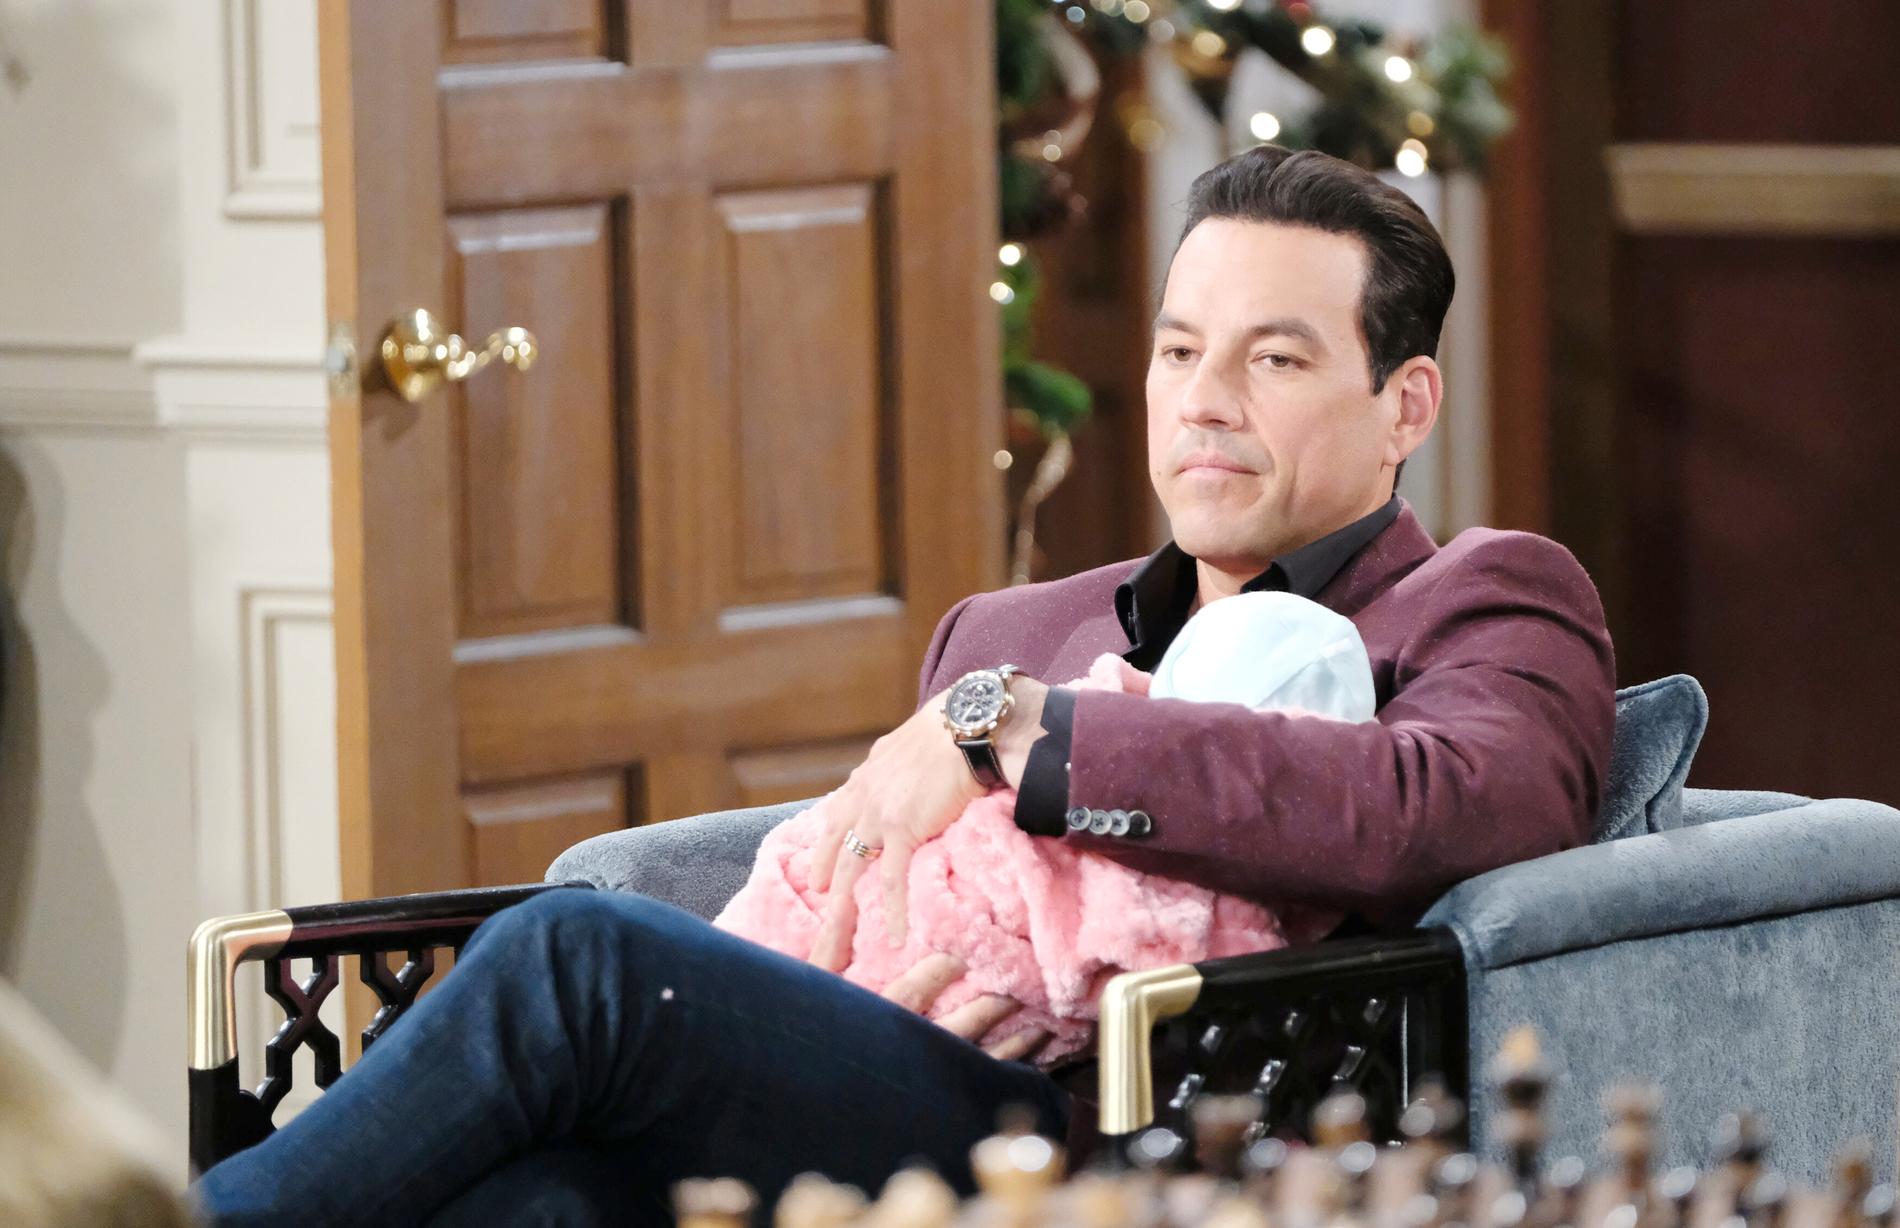 Tyler Christopher i ”Days of our lives”.